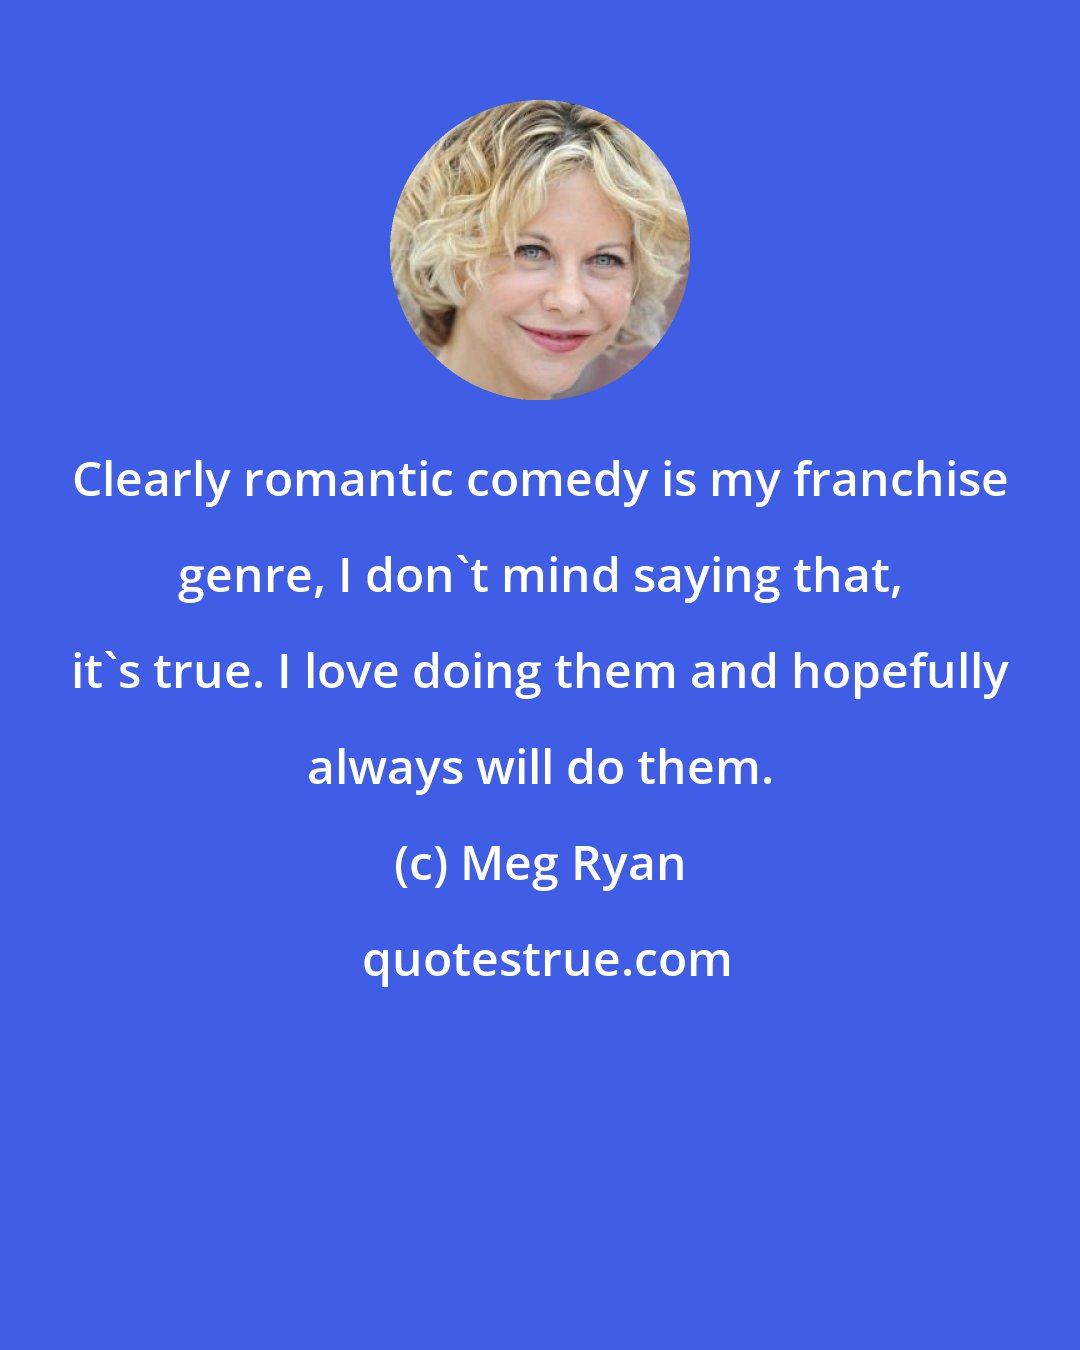 Meg Ryan: Clearly romantic comedy is my franchise genre, I don't mind saying that, it's true. I love doing them and hopefully always will do them.